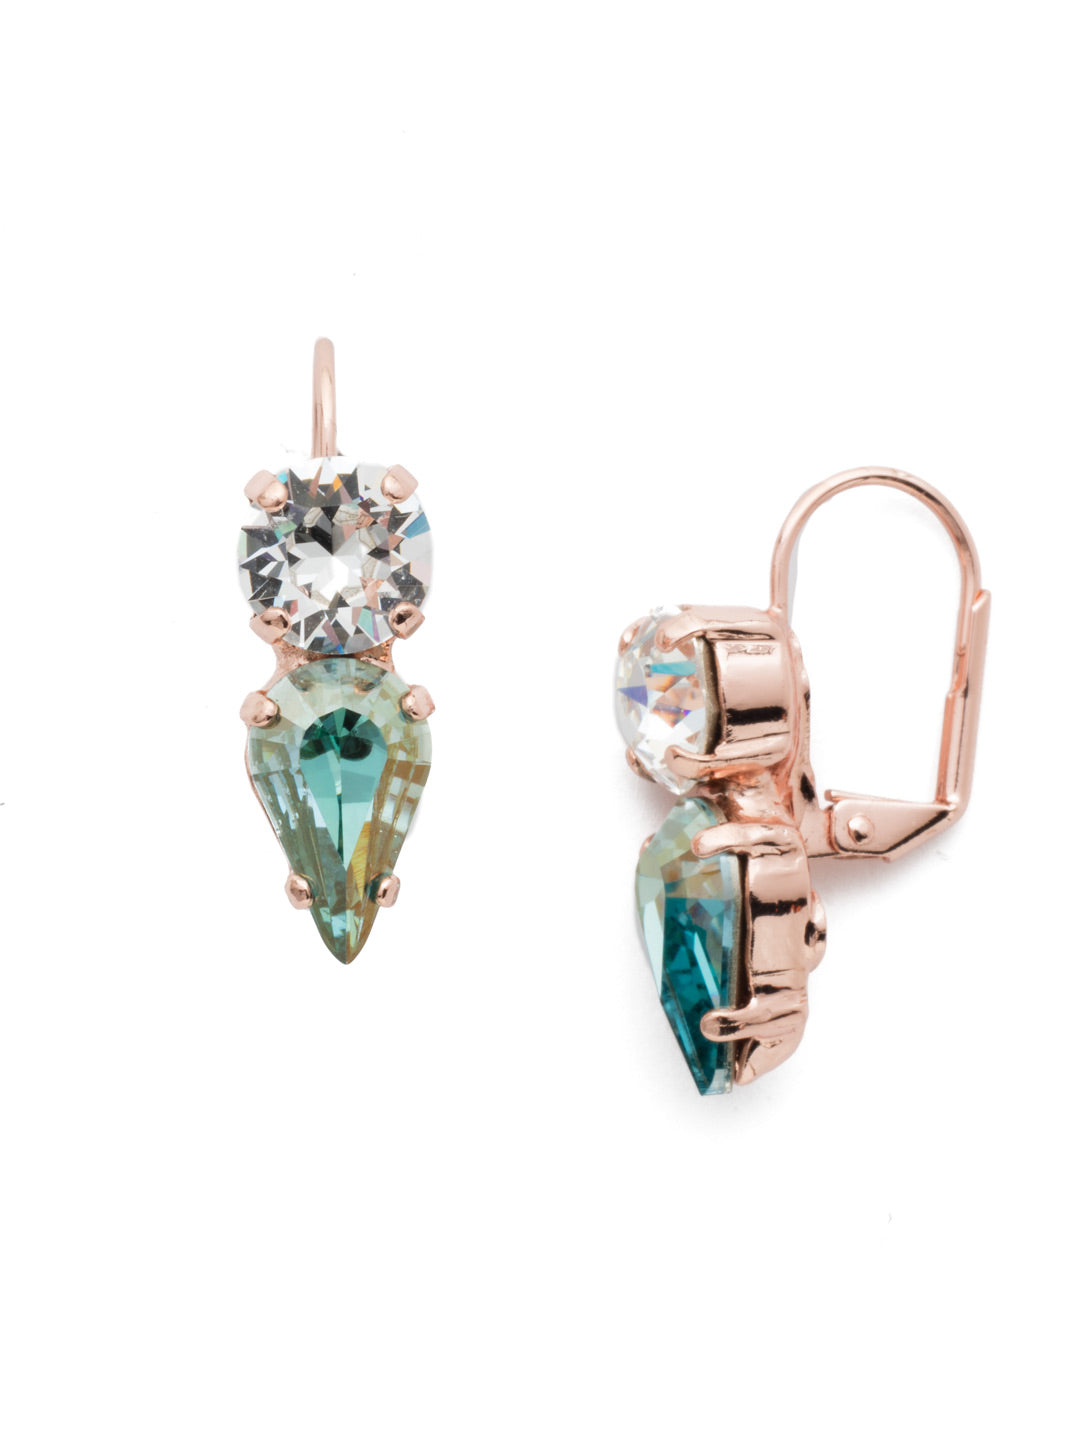 Martina Dangle Earrings - EET6RGCAZ - Our Martina Dangle Earrings combine a round and pear-shaped Sorrelli crystals for a simple-yet-edgy set you can rely on being in style for decades to come. From Sorrelli's Crystal Azure collection in our Rose Gold-tone finish.